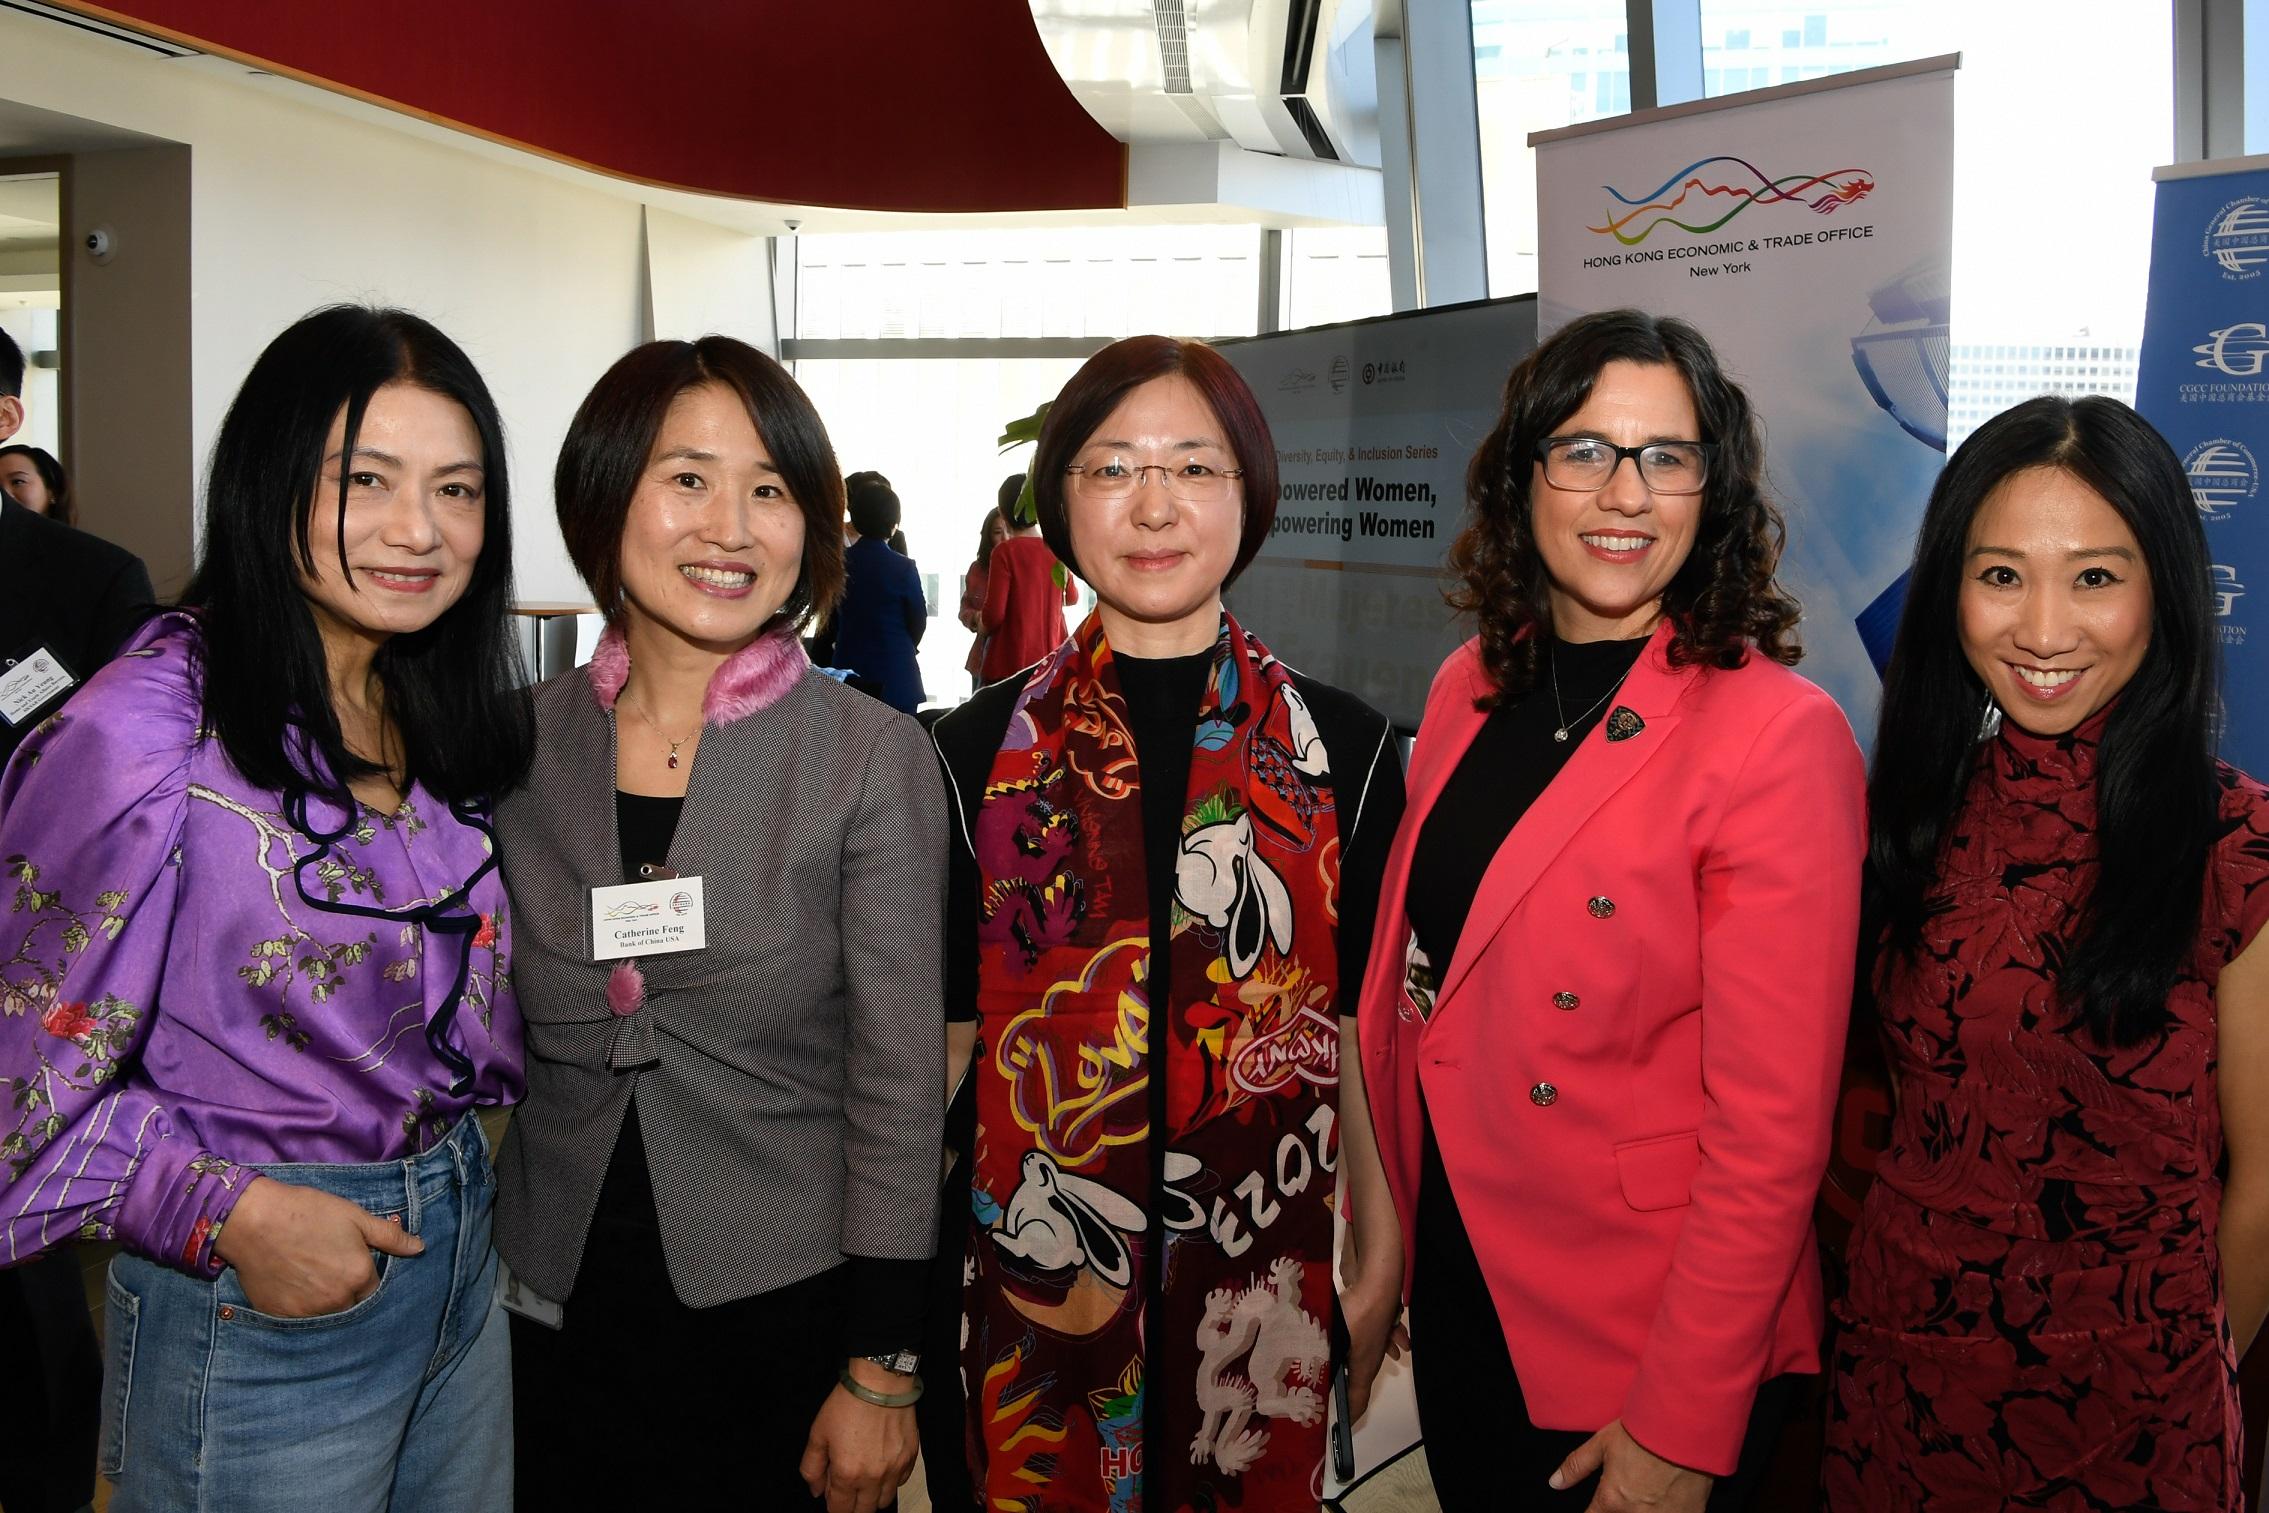 To celebrate International Women's Day, the Hong Kong Economic and Trade Office in New York (HKETONY) co-organised a lunch reception themed "Empowered Women, Empowering Women" with the China General Chamber of Commerce - USA (CGCC) on March 8 (New York time), attracting more than 40 women leaders from think tanks, the business community, creative industry and sports sector in New York. Speakers at the luncheon include (from left to right) renowned fashion designer Vivienne Tam; the Senior Vice President of Bank of China, Ms Catherine Feng; Vice Chair of the CGCC and Chairwoman of the Industrial and Commercial Bank of China US Region Management Committee, Ms Zhang Jianyu; the Executive Vice President of Global Partnerships of NBA team Brooklyn Nets, Ms Catherine Carlson; and the Director of the HKETONY, Ms Candy Nip.